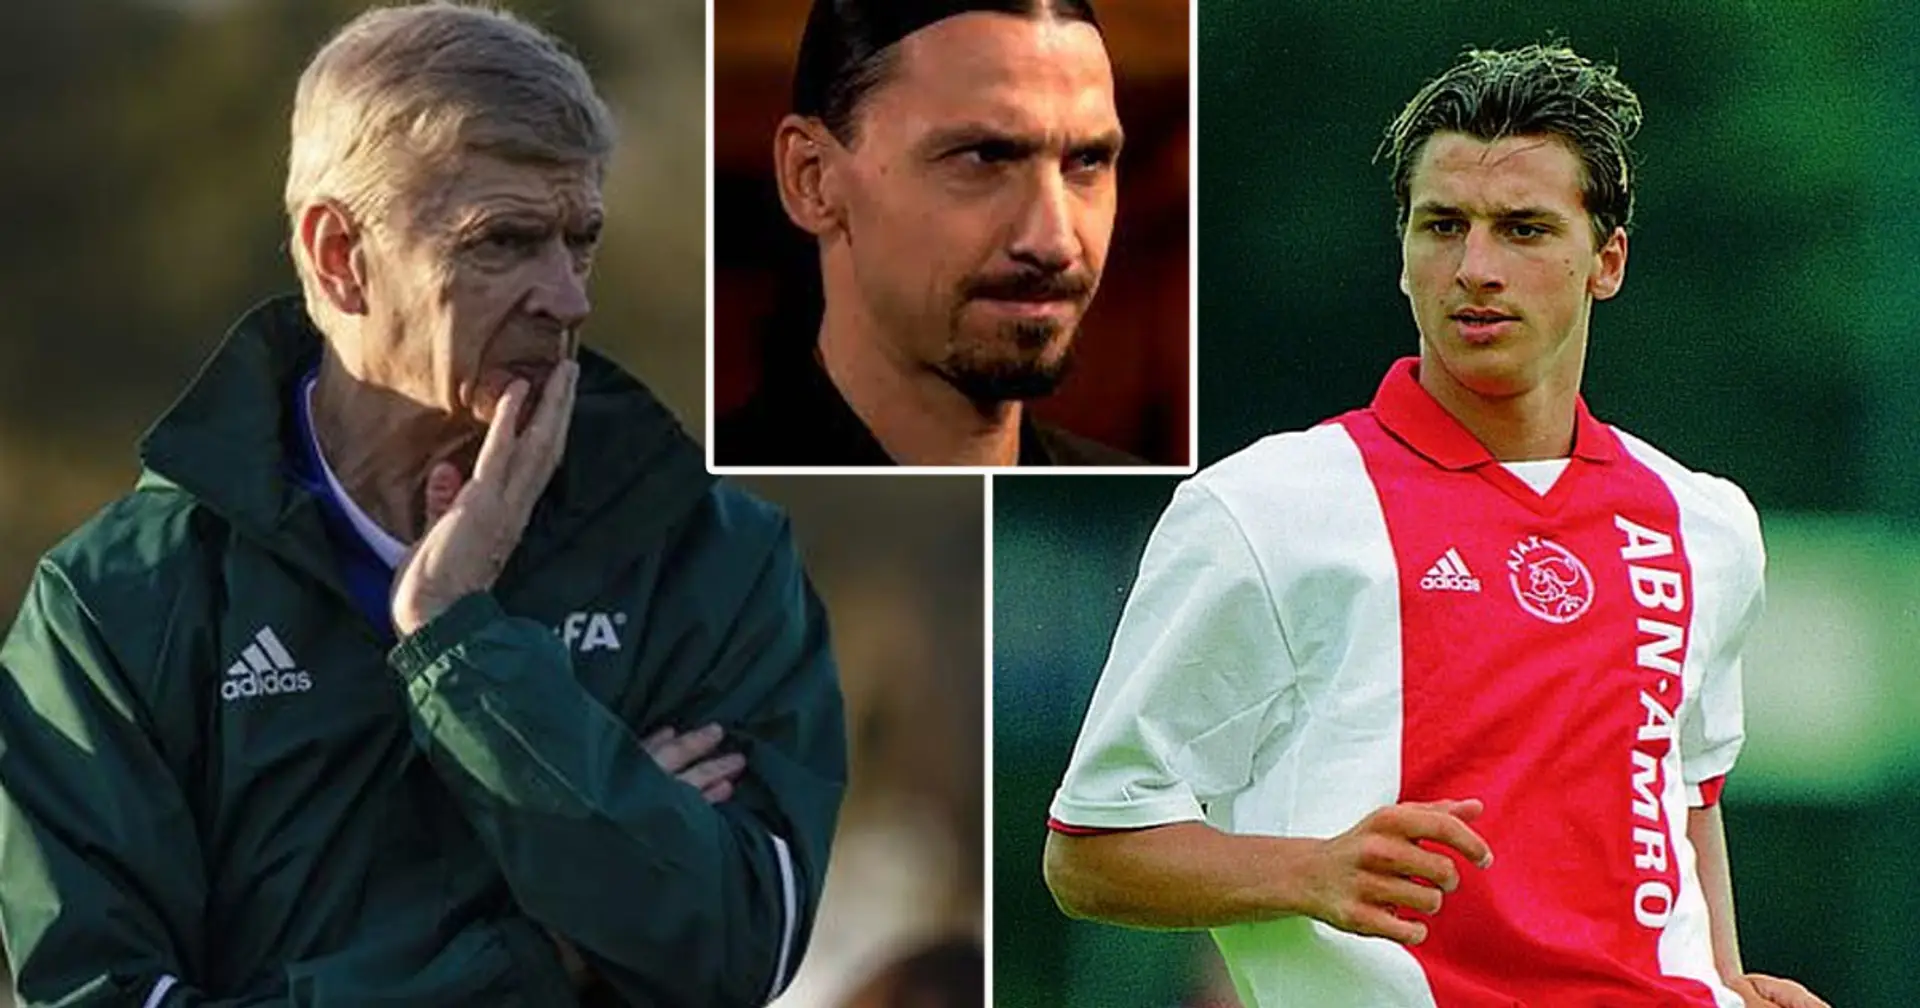 'Everything was good until he said that': How Wenger's single phrase ruined Zlatan's move to Arsenal